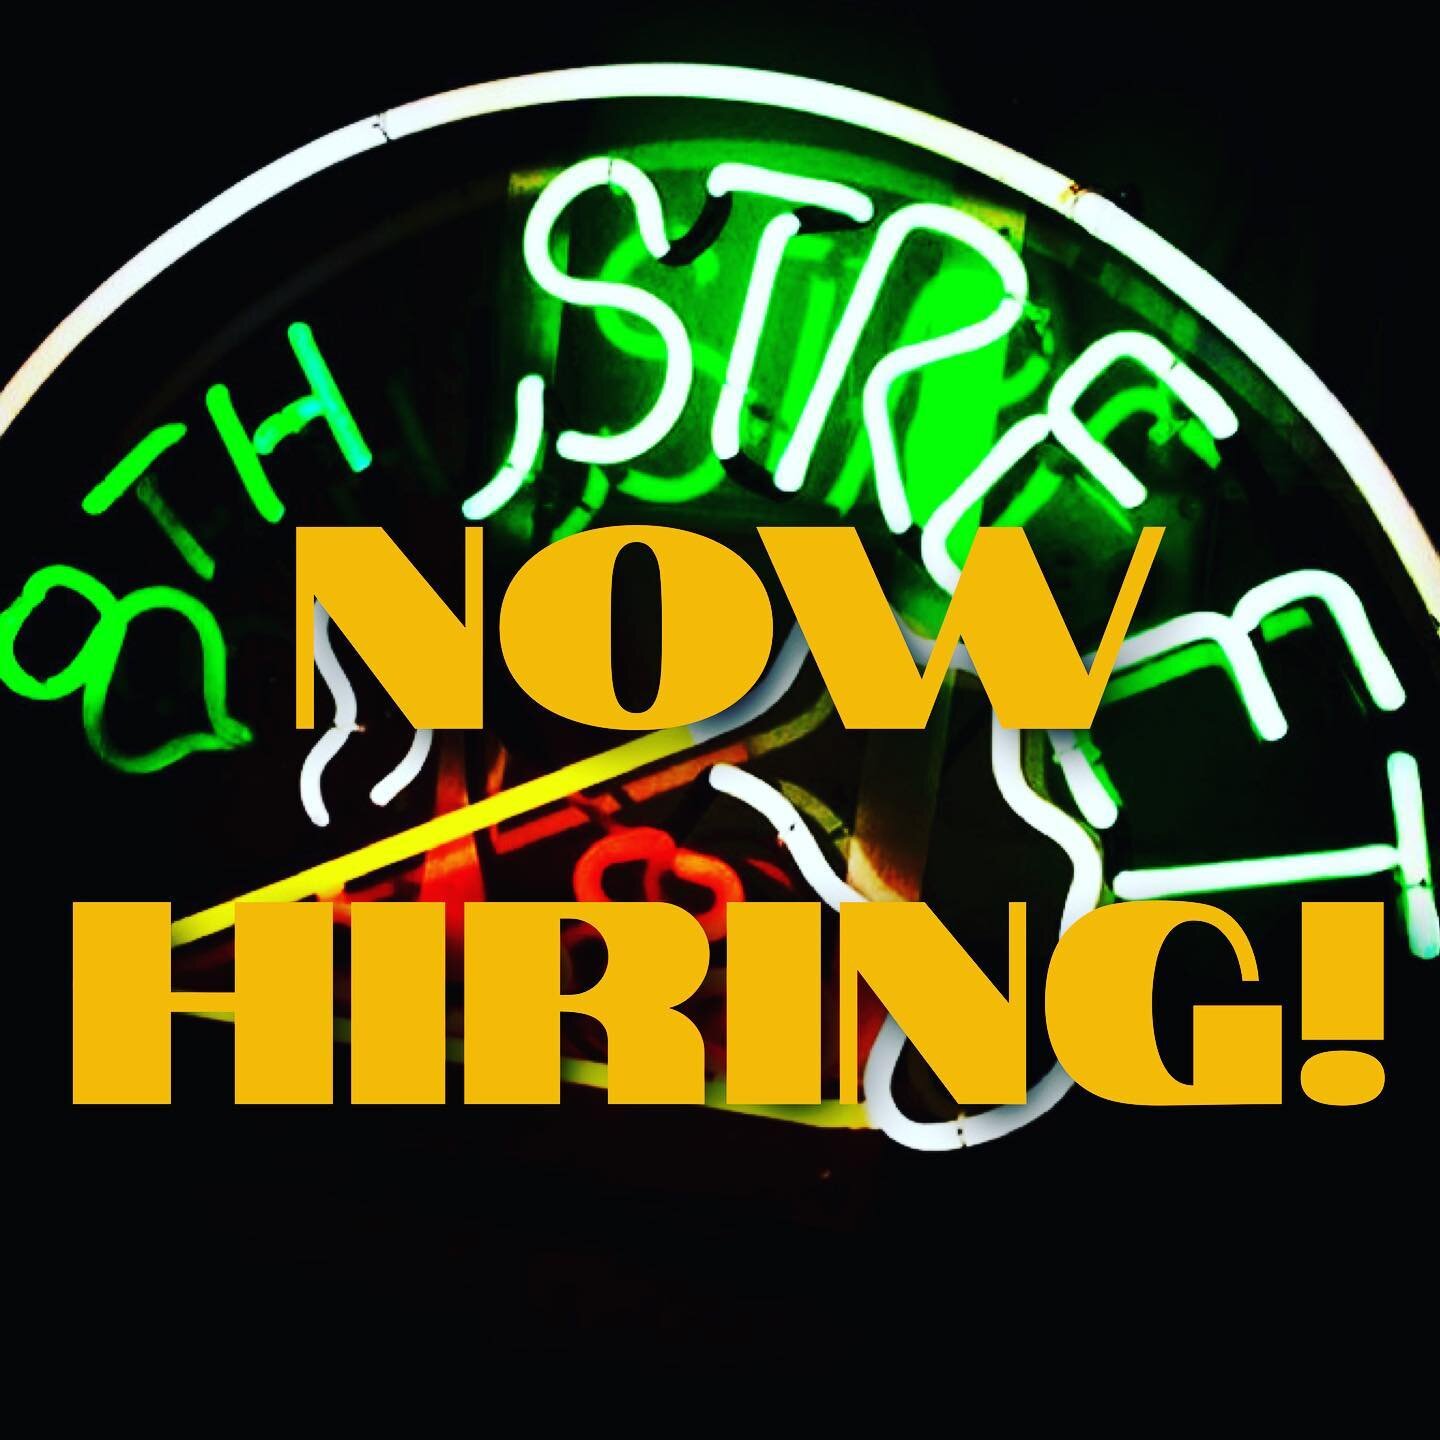 Pie Hole downtown is looking for a few new team members! Stop by and drop off a resume. It&rsquo;s a fun crew with flexible hours 😎